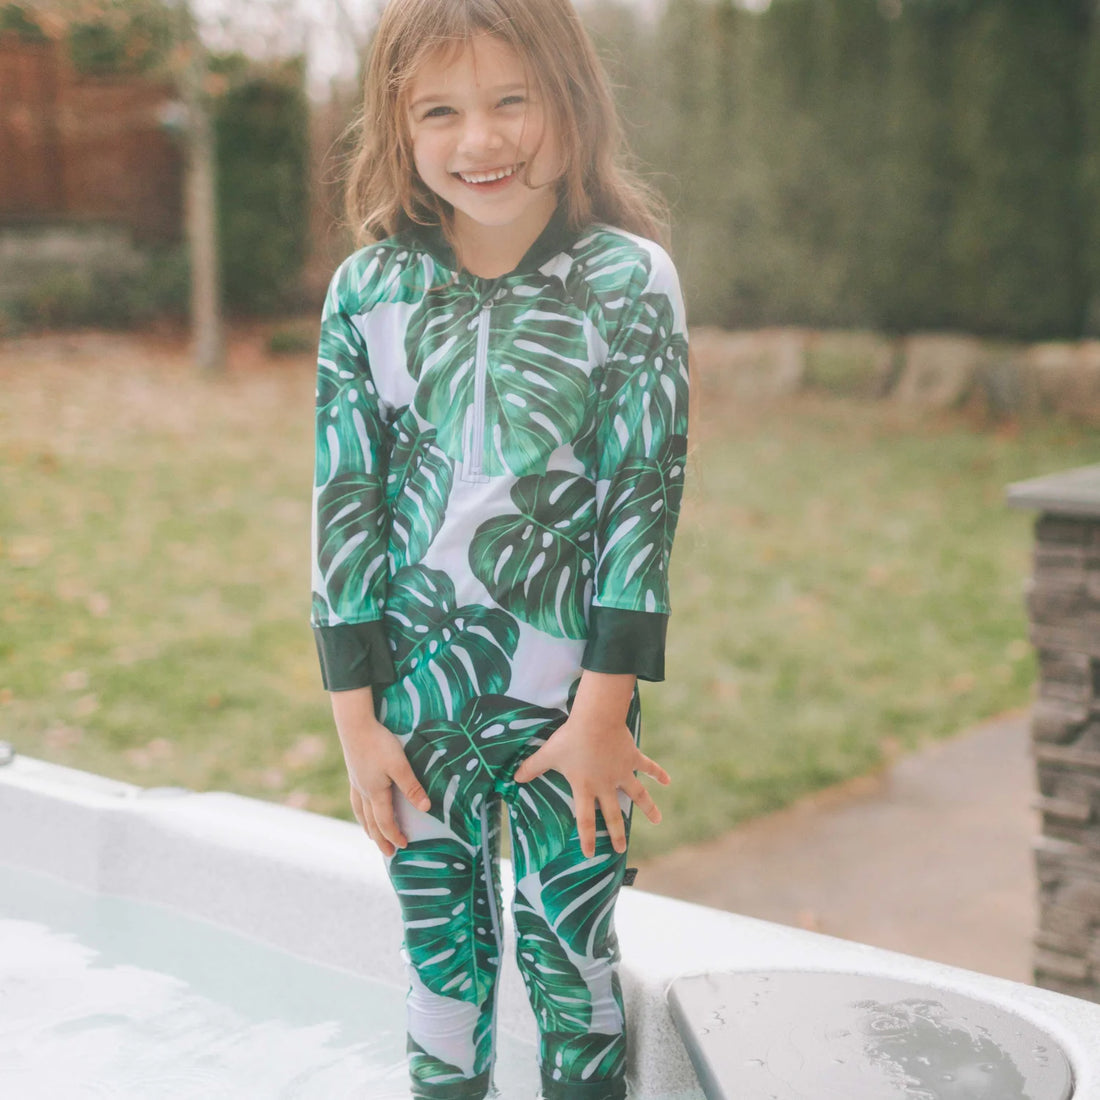 Honeysuckle Swim Co Sunsuit - Leaf of the Party $35 sale - discount applied at checkout